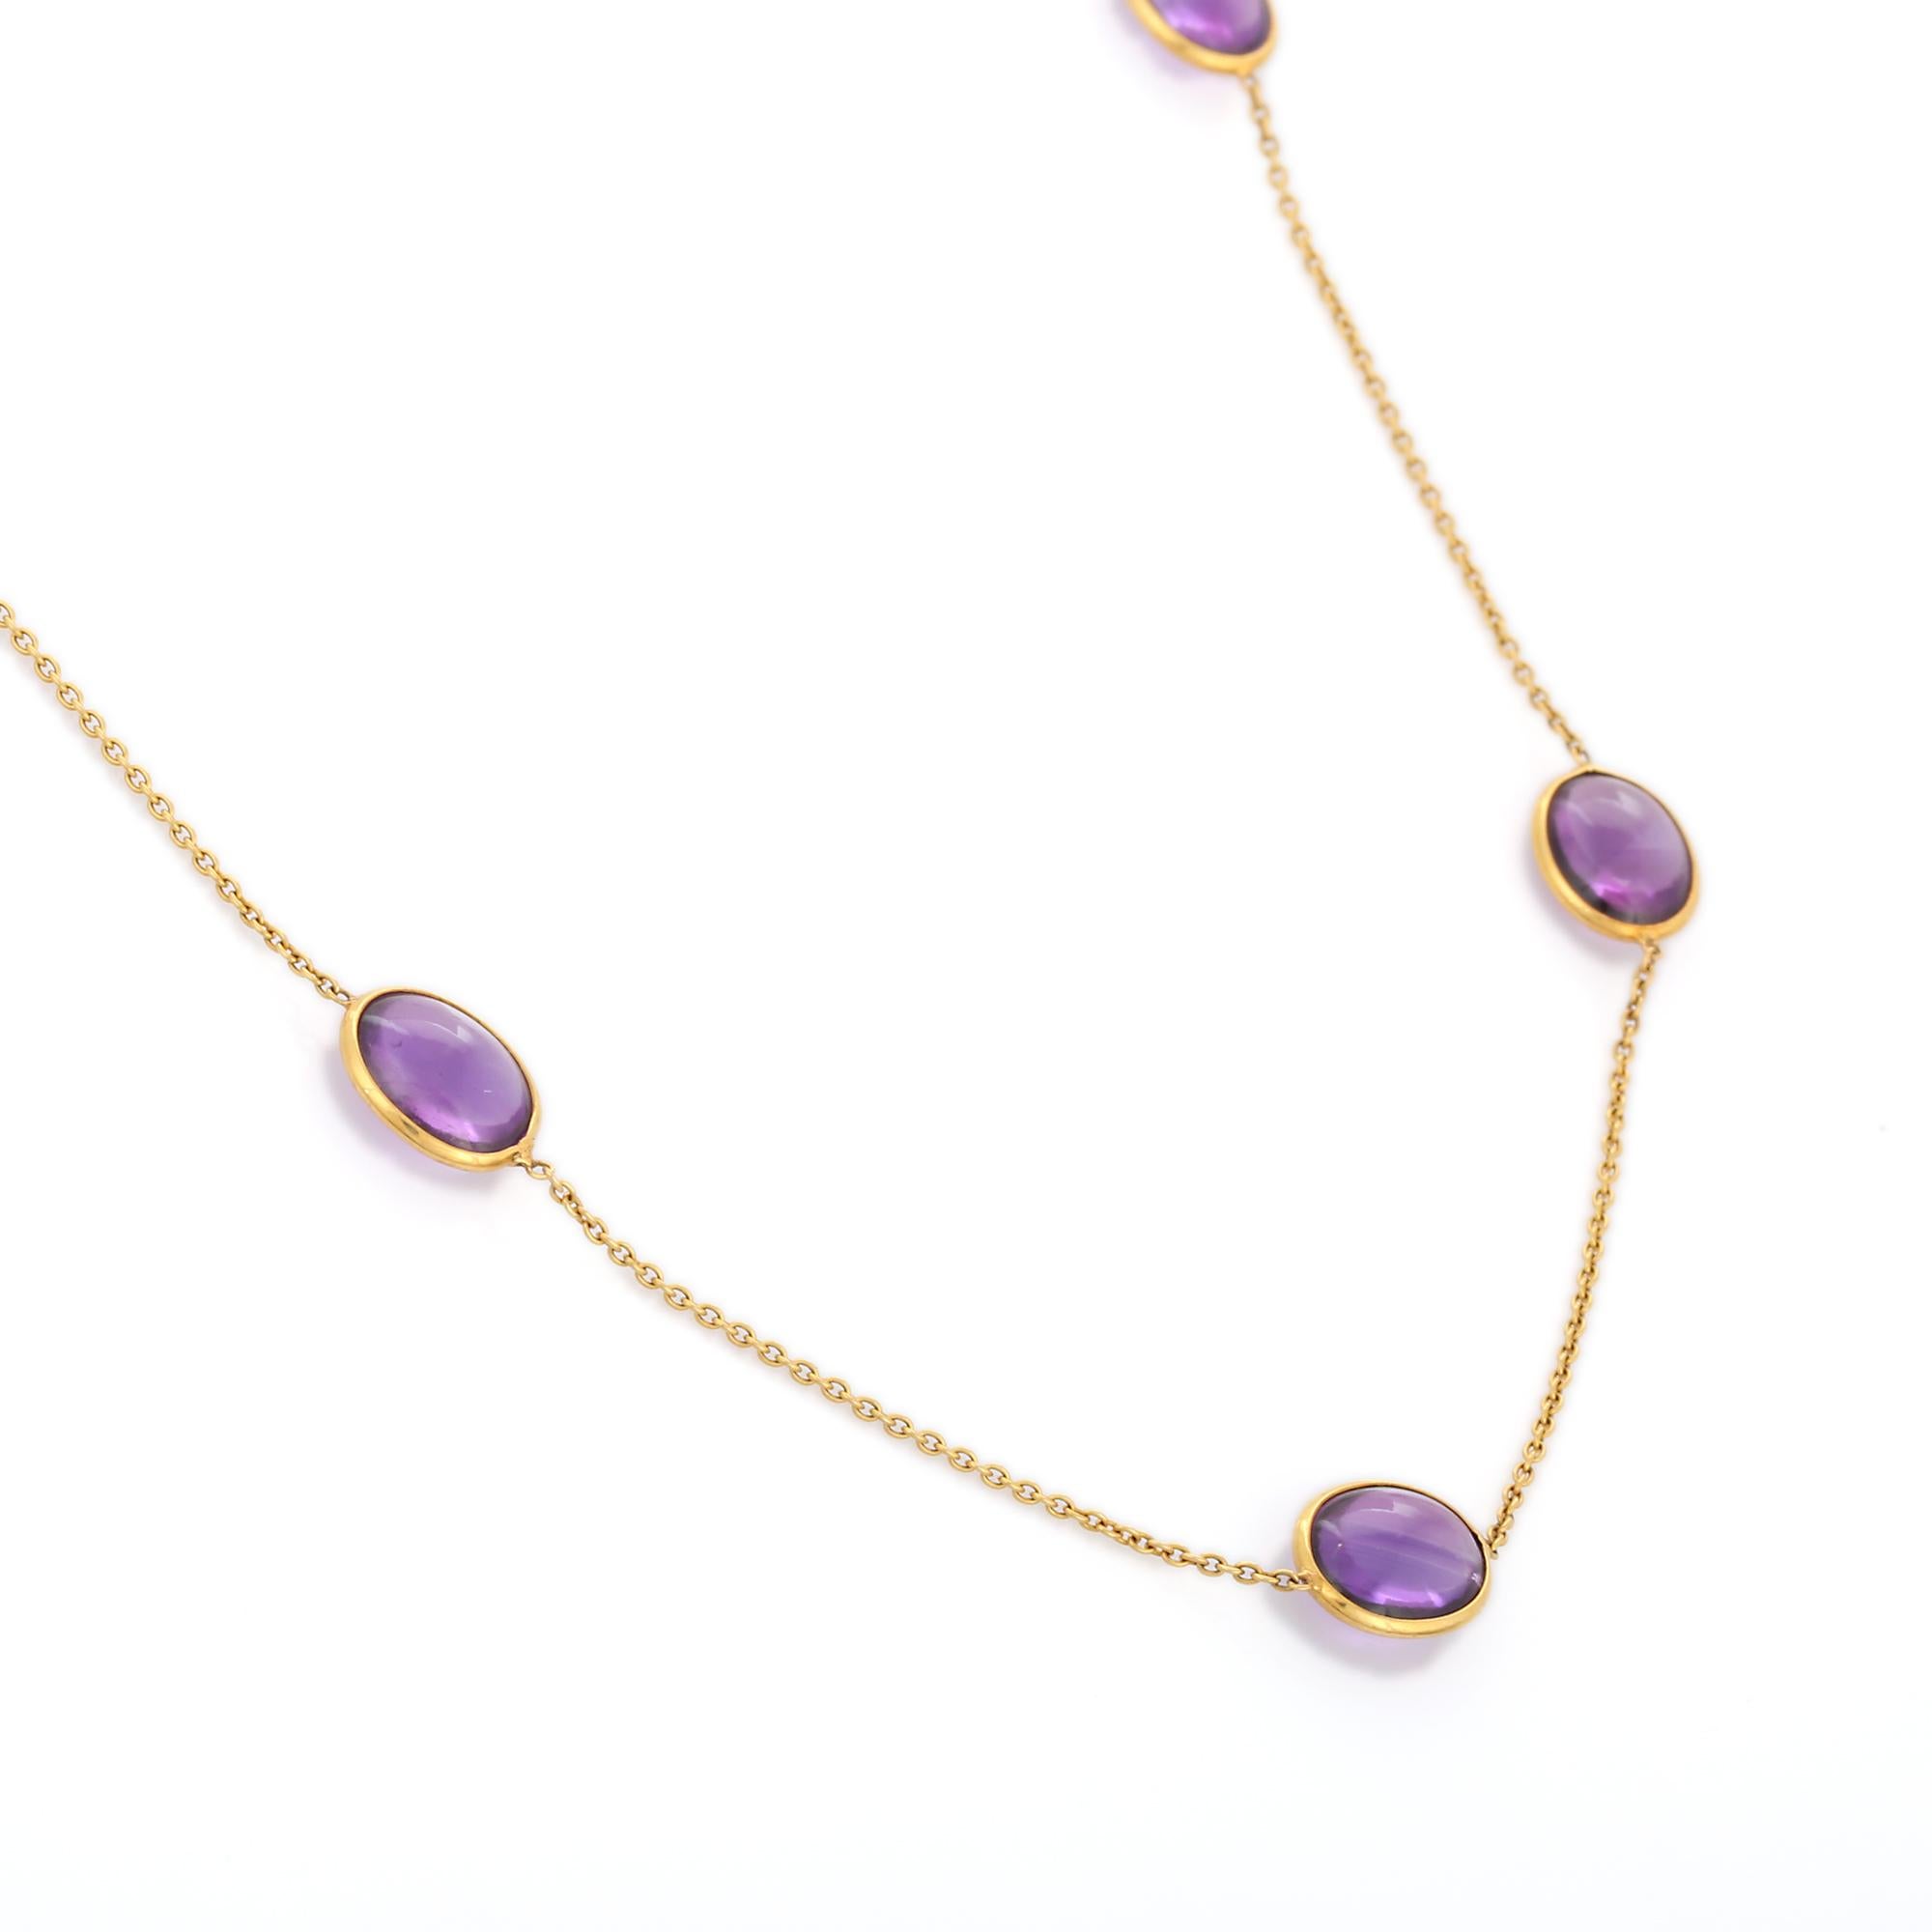 Modern 25.5 Ct Oval Amethyst Chain Necklace Enhancer in 18K Yellow Gold In New Condition For Sale In Houston, TX